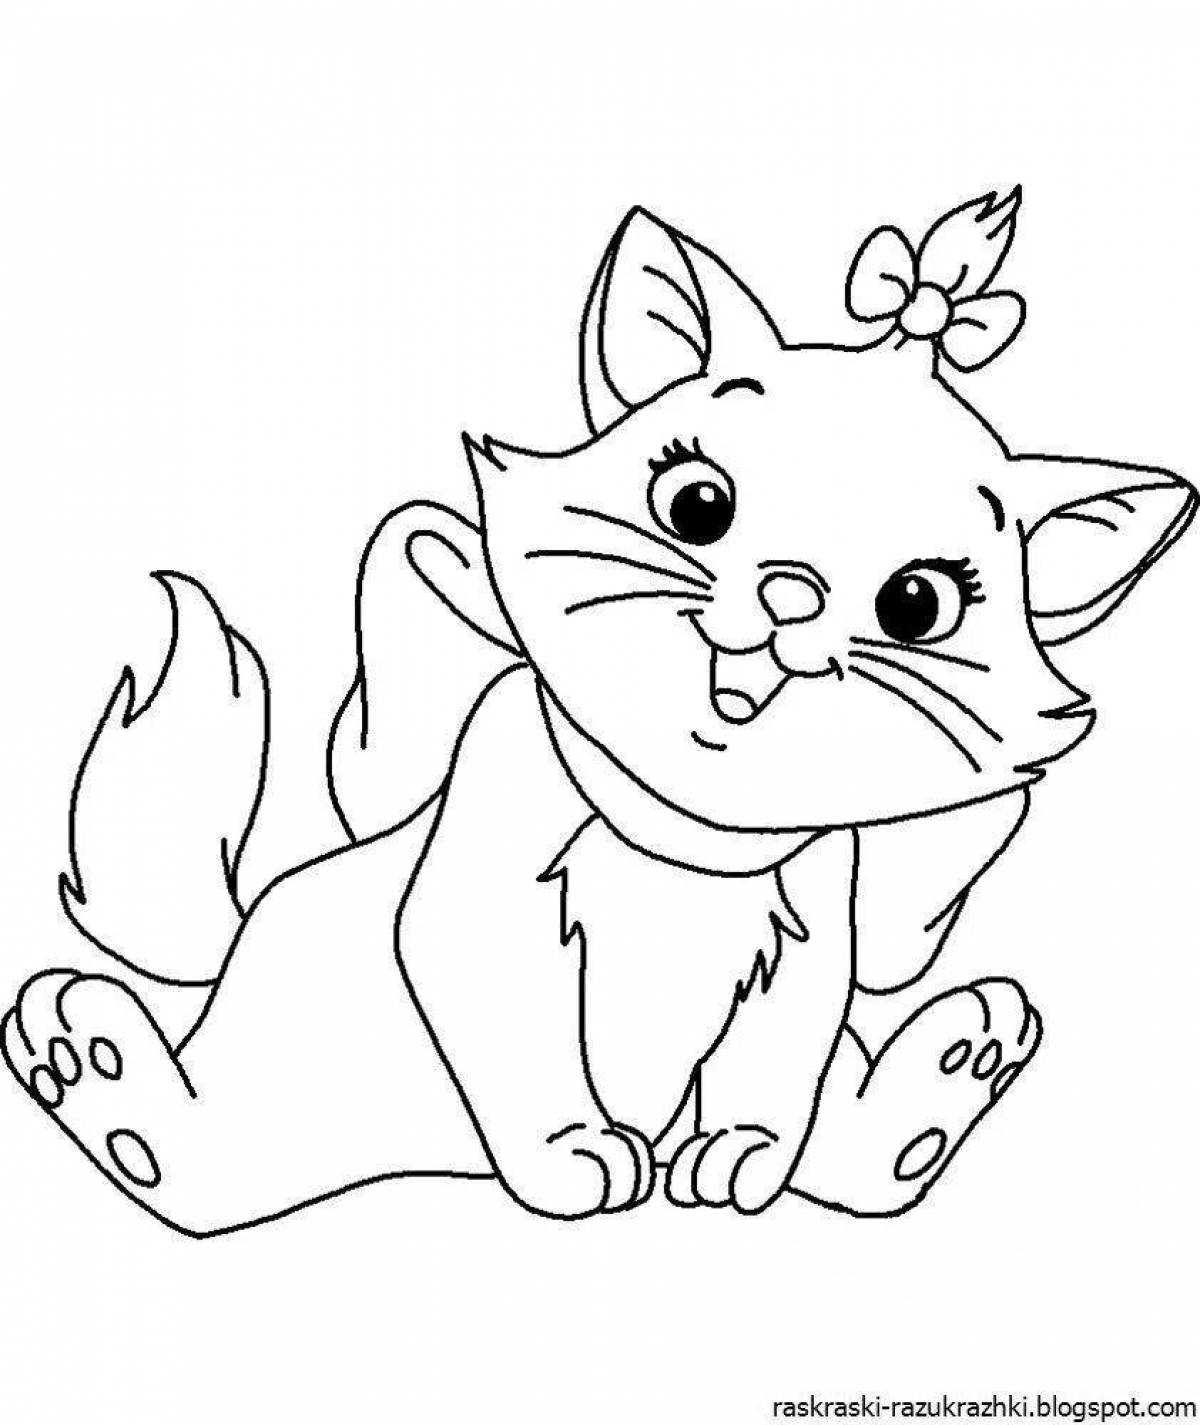 Kitty glitter coloring book for kids 6-7 years old